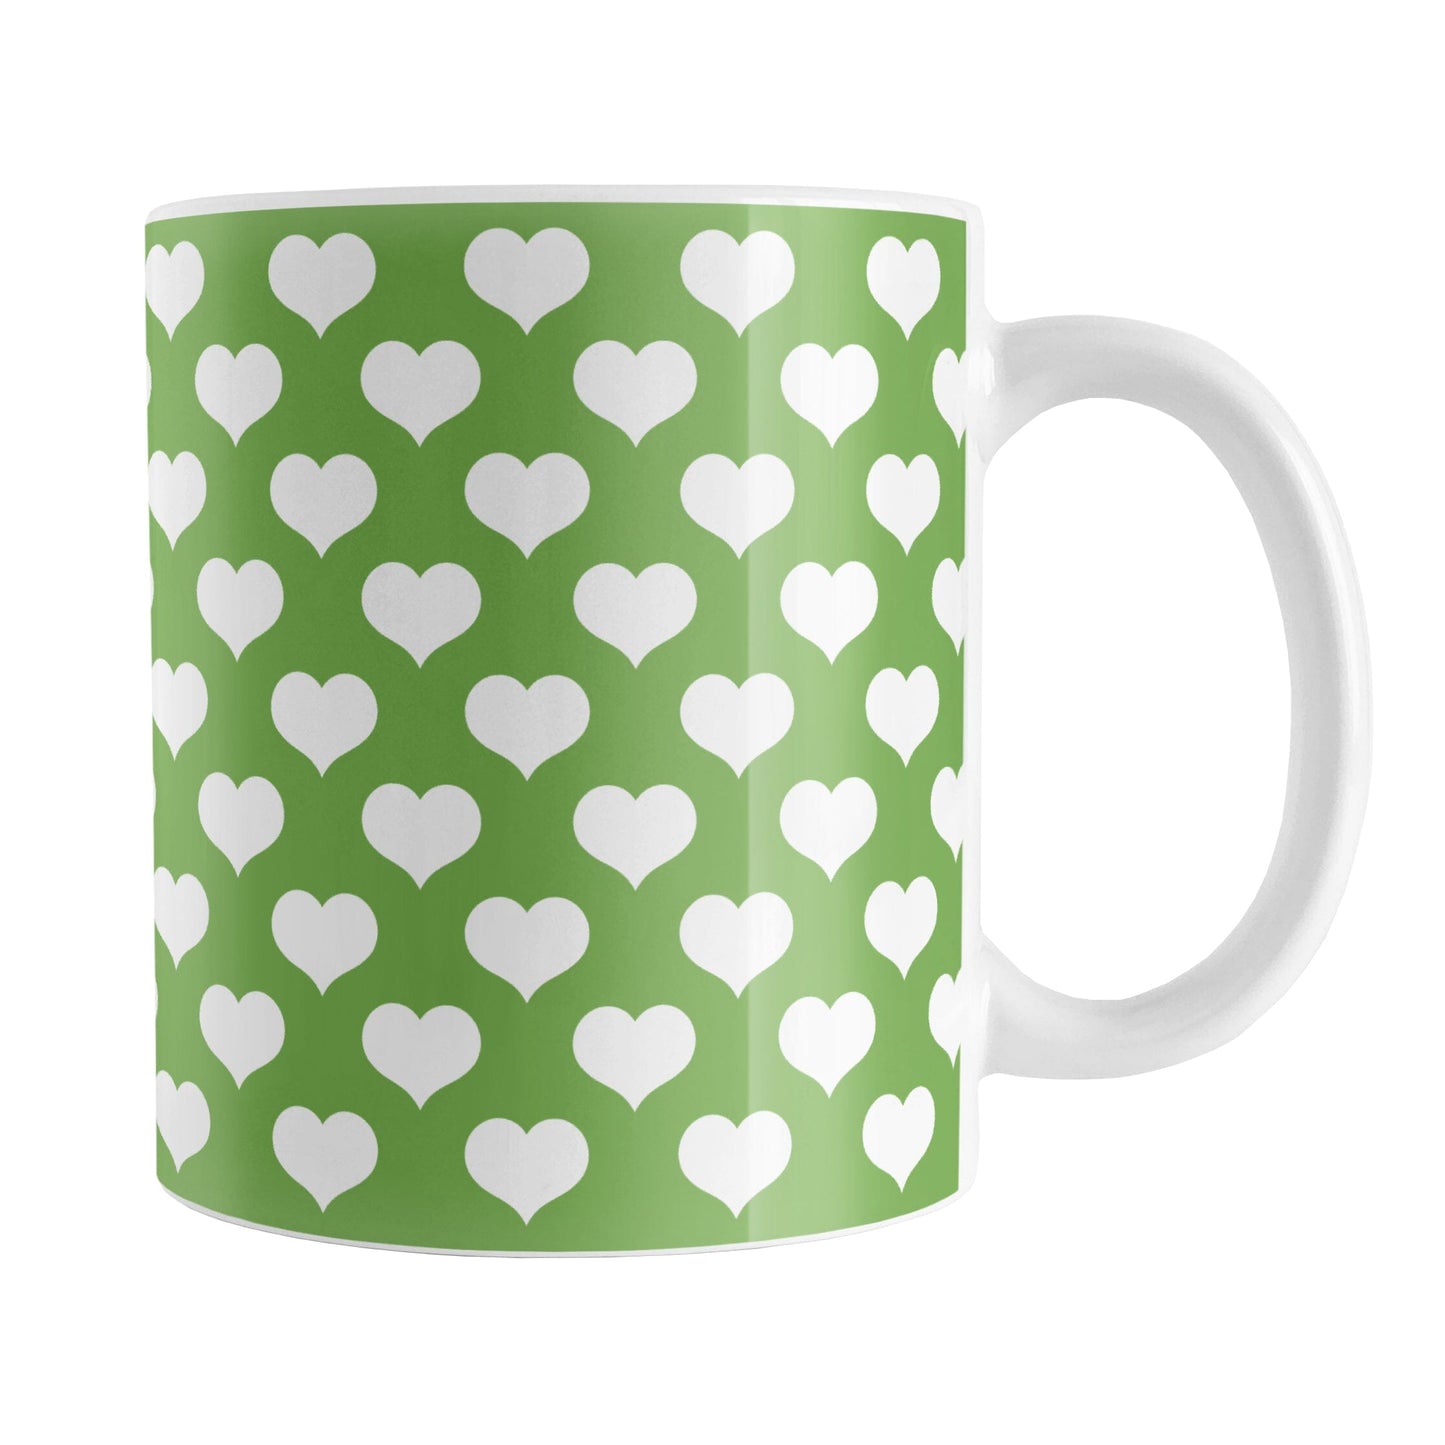 White Hearts Pattern Green Mug (11oz) at Amy's Coffee Mugs. A ceramic coffee mug designed with a pattern of big white hearts over a green background color that wraps around the mug to the handle. It's the perfect mug for anyone who loves hearts and the color green.